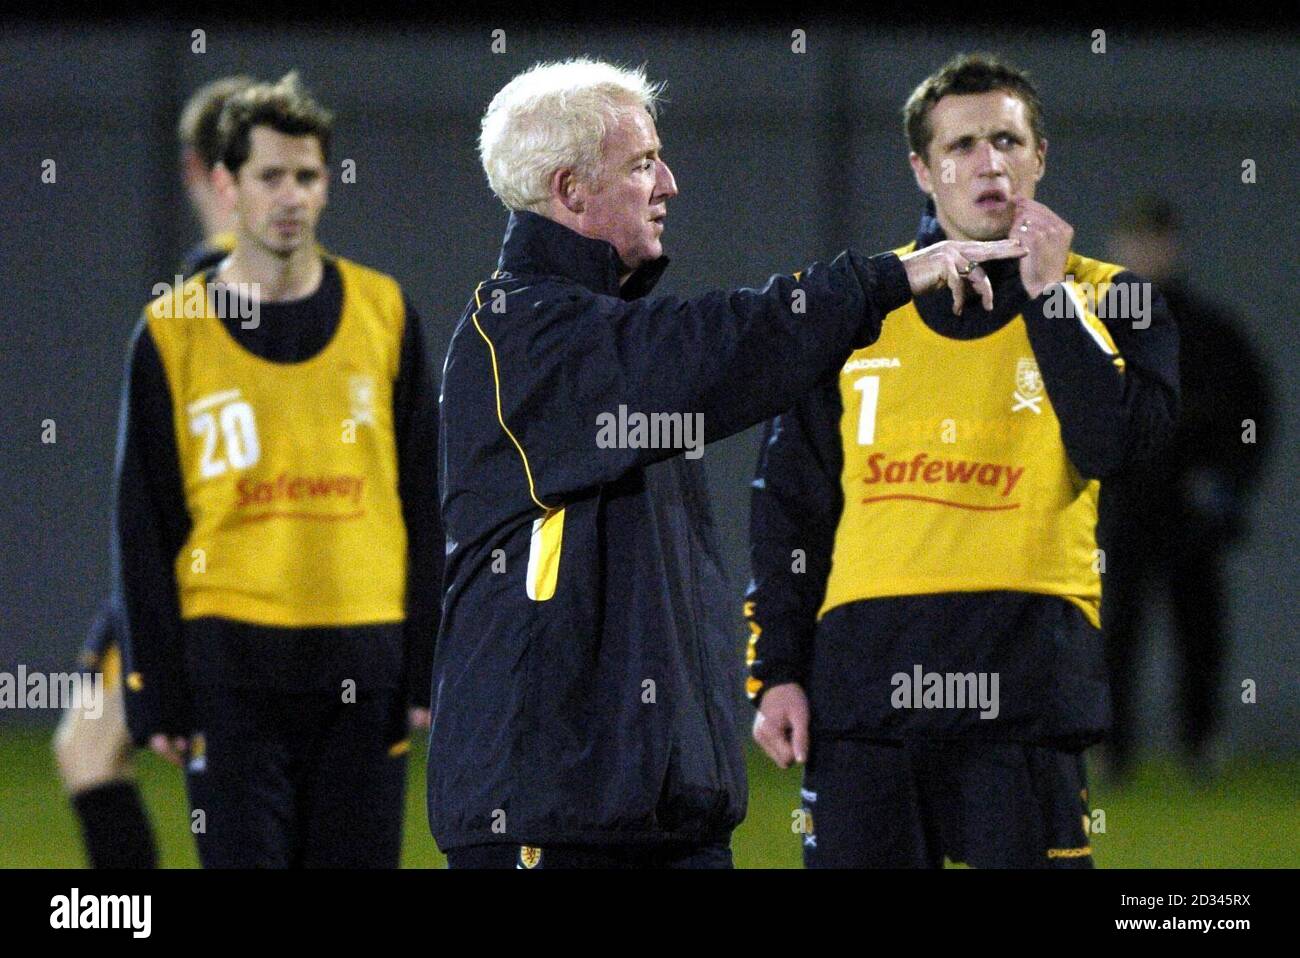 Scotland's caretaker manager Tommy Burns (centre) takes training watched by Jackie McNamara (left) and Scott Severin  (right) during a training session at the Strathclyde Homes Stadium in Dumbarton before their International friendly against Sweden this Wednesday.   EDITORIAL USE ONLY Stock Photo